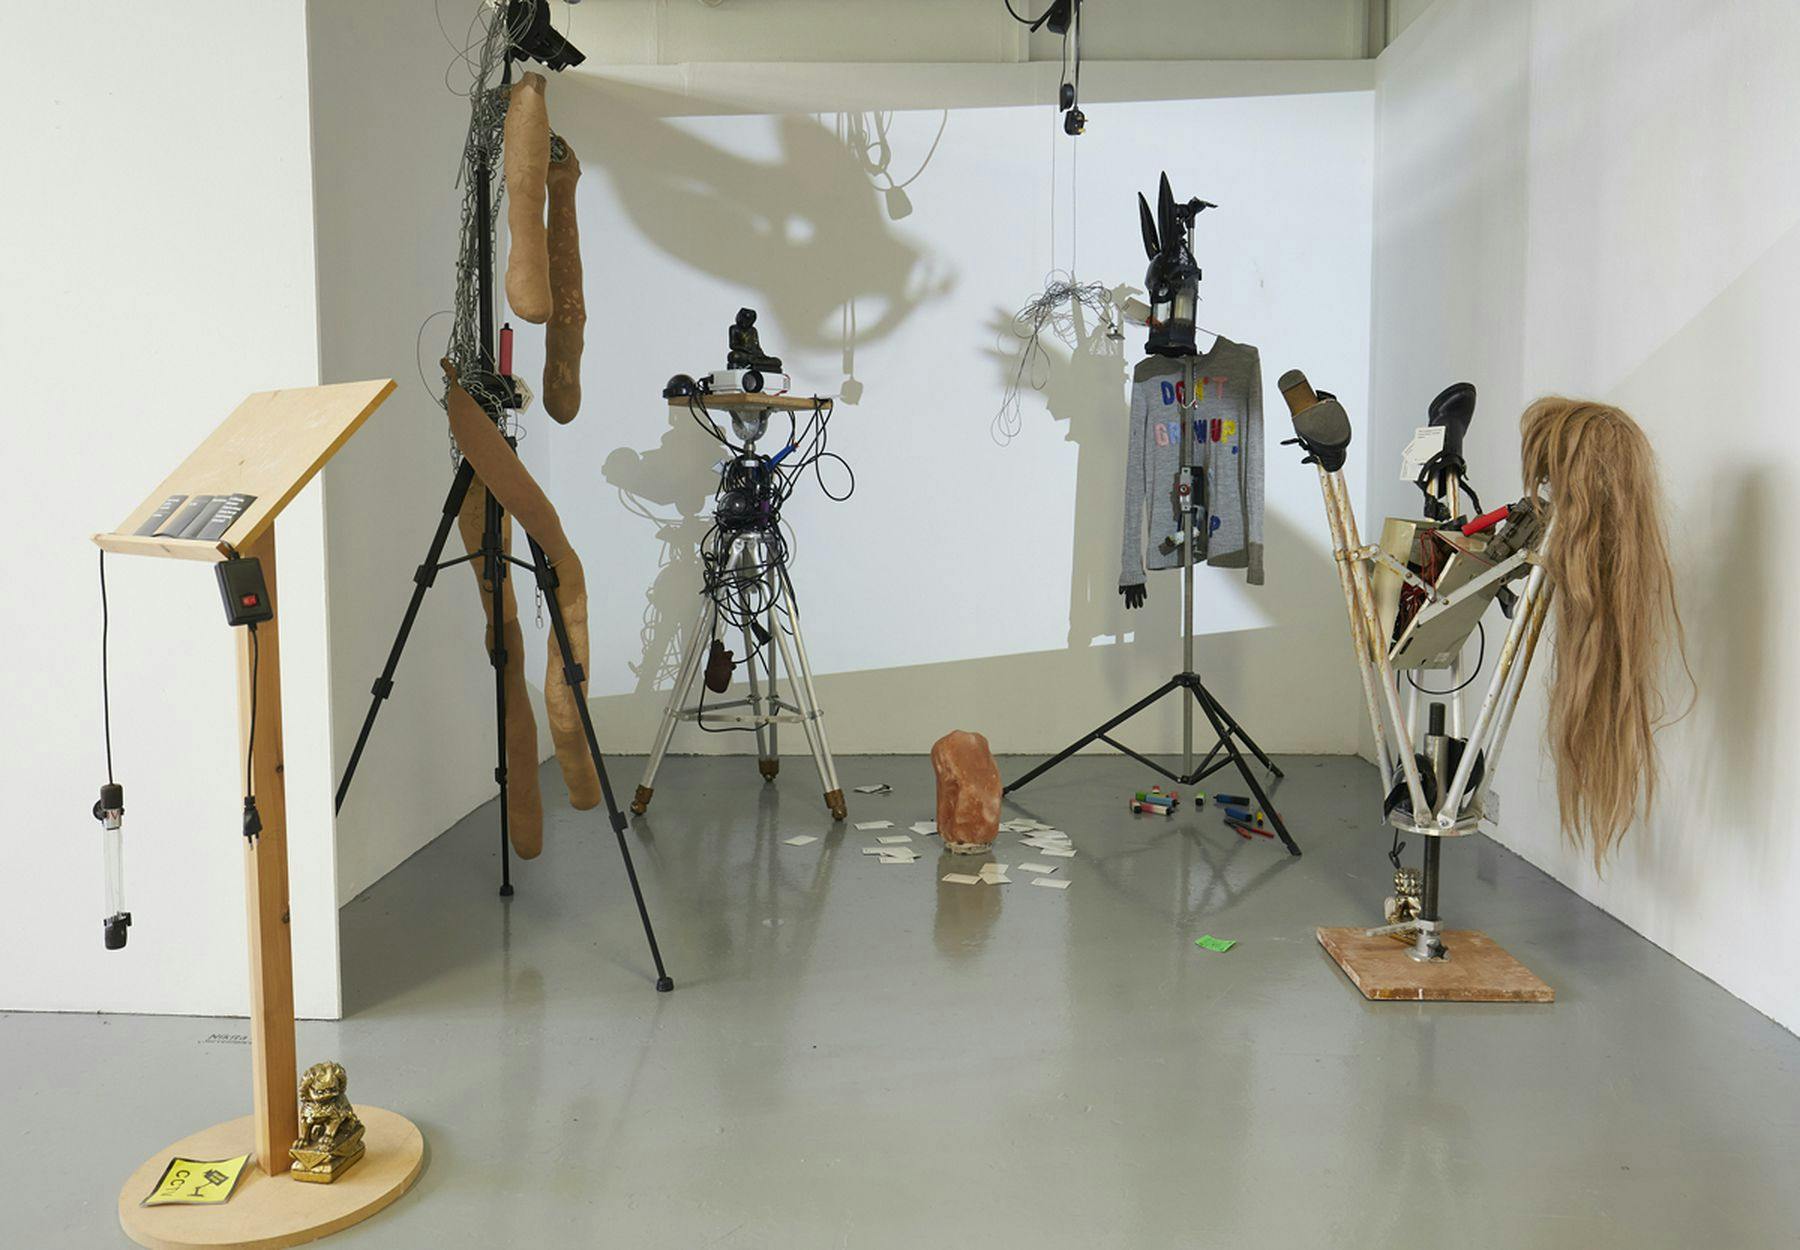 A photograph of an installation featuring a lectern, two tripods and two projector stands, one with a projector on top. They are lined in a row and adorned with different objects including a wig, jumper and small statues. One of the projector stands is upturned. On the floor there are cards, felt tips and crystal.